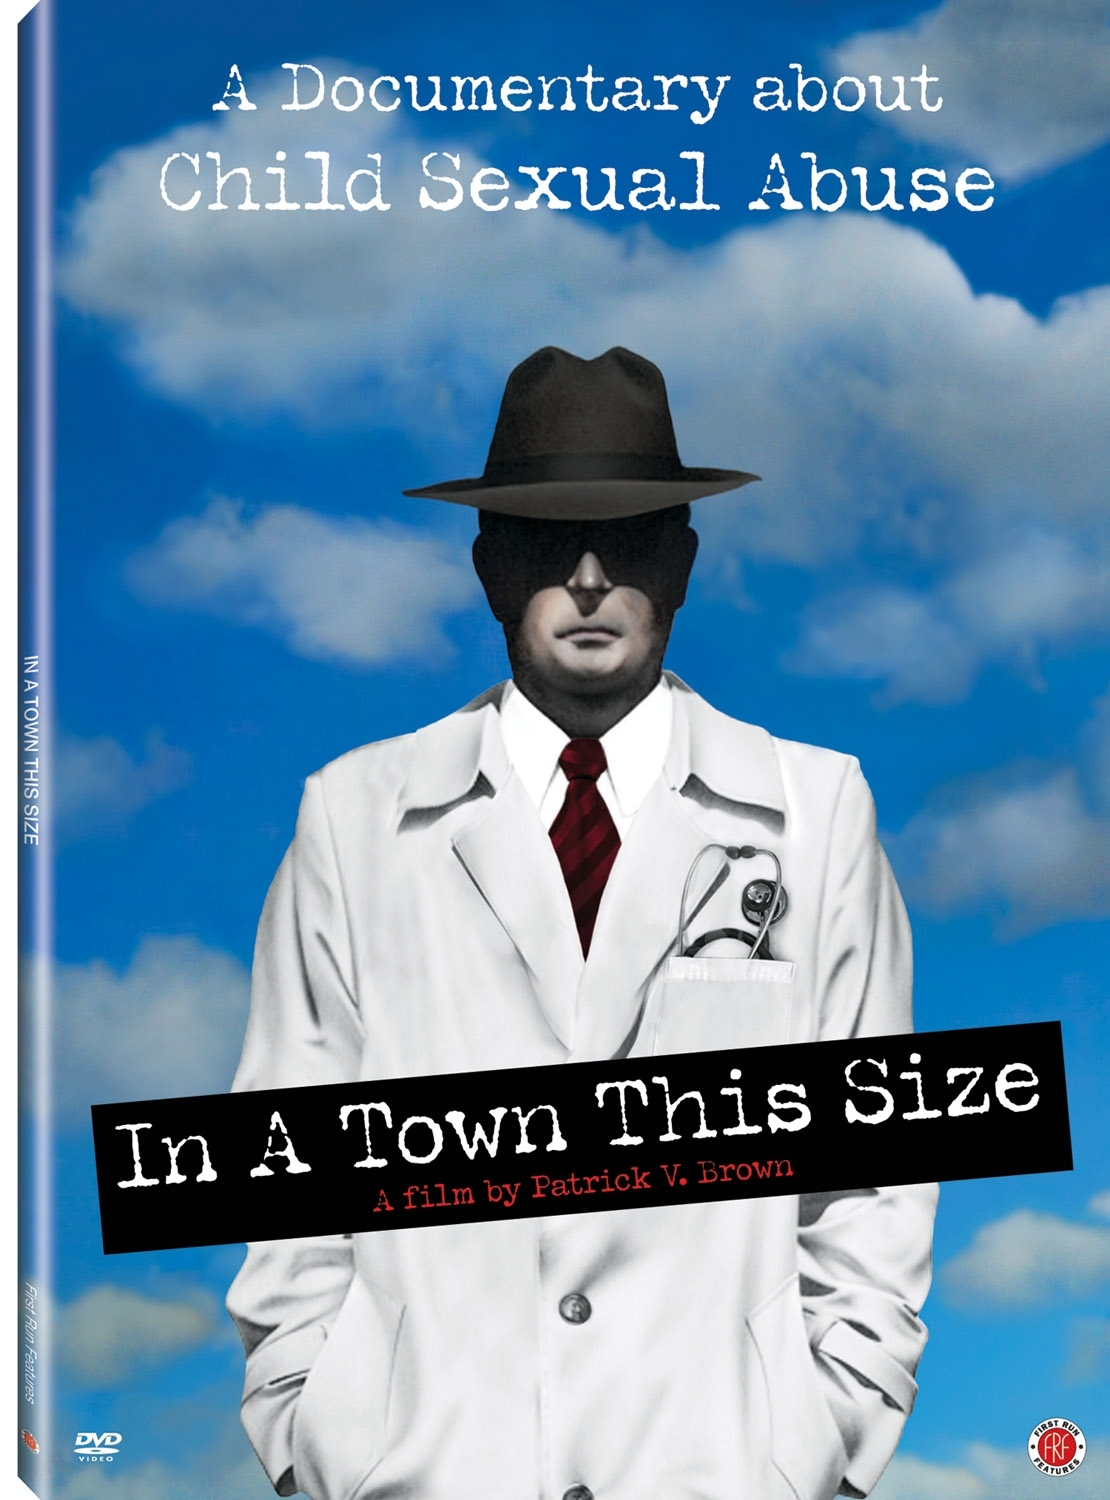 IN A TOWN THIS SIZE